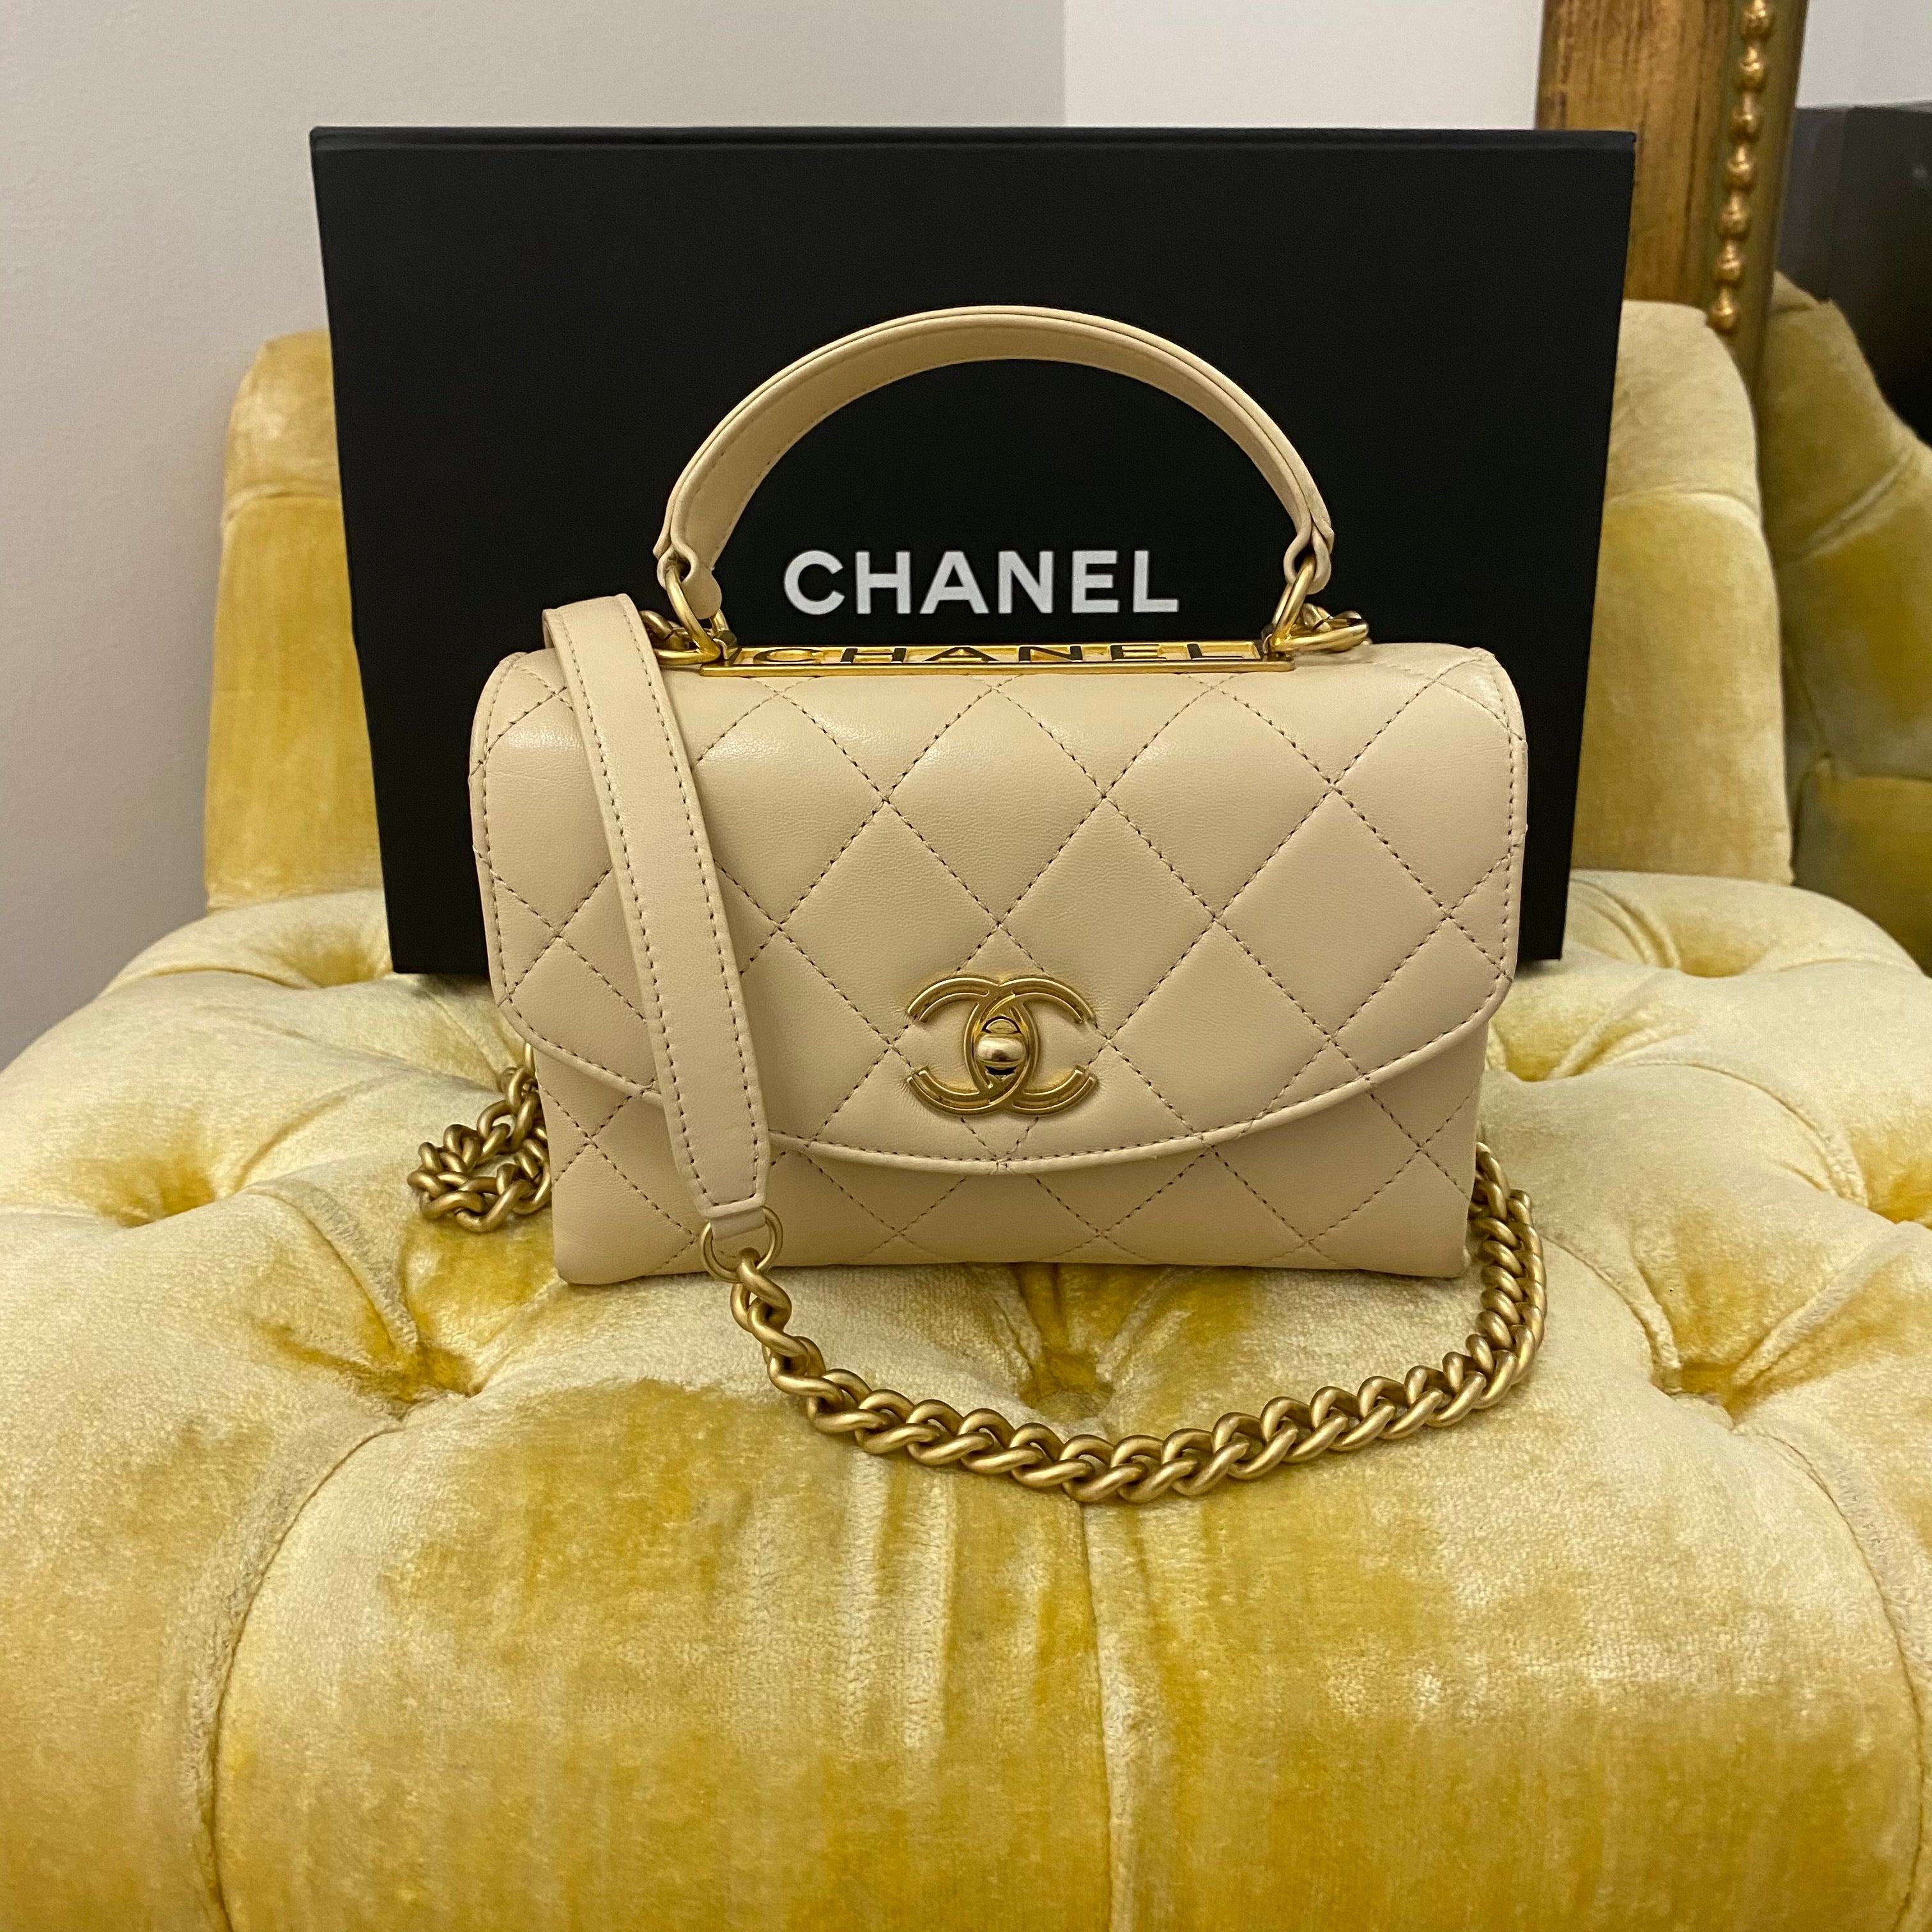 Della Marga - Gorgeous Chanel Business Affinity bag in beige 🤩 📸:  @miss.shirley.girly #chanel #chanelbusinessaffinity #chanelbag #chanelss20